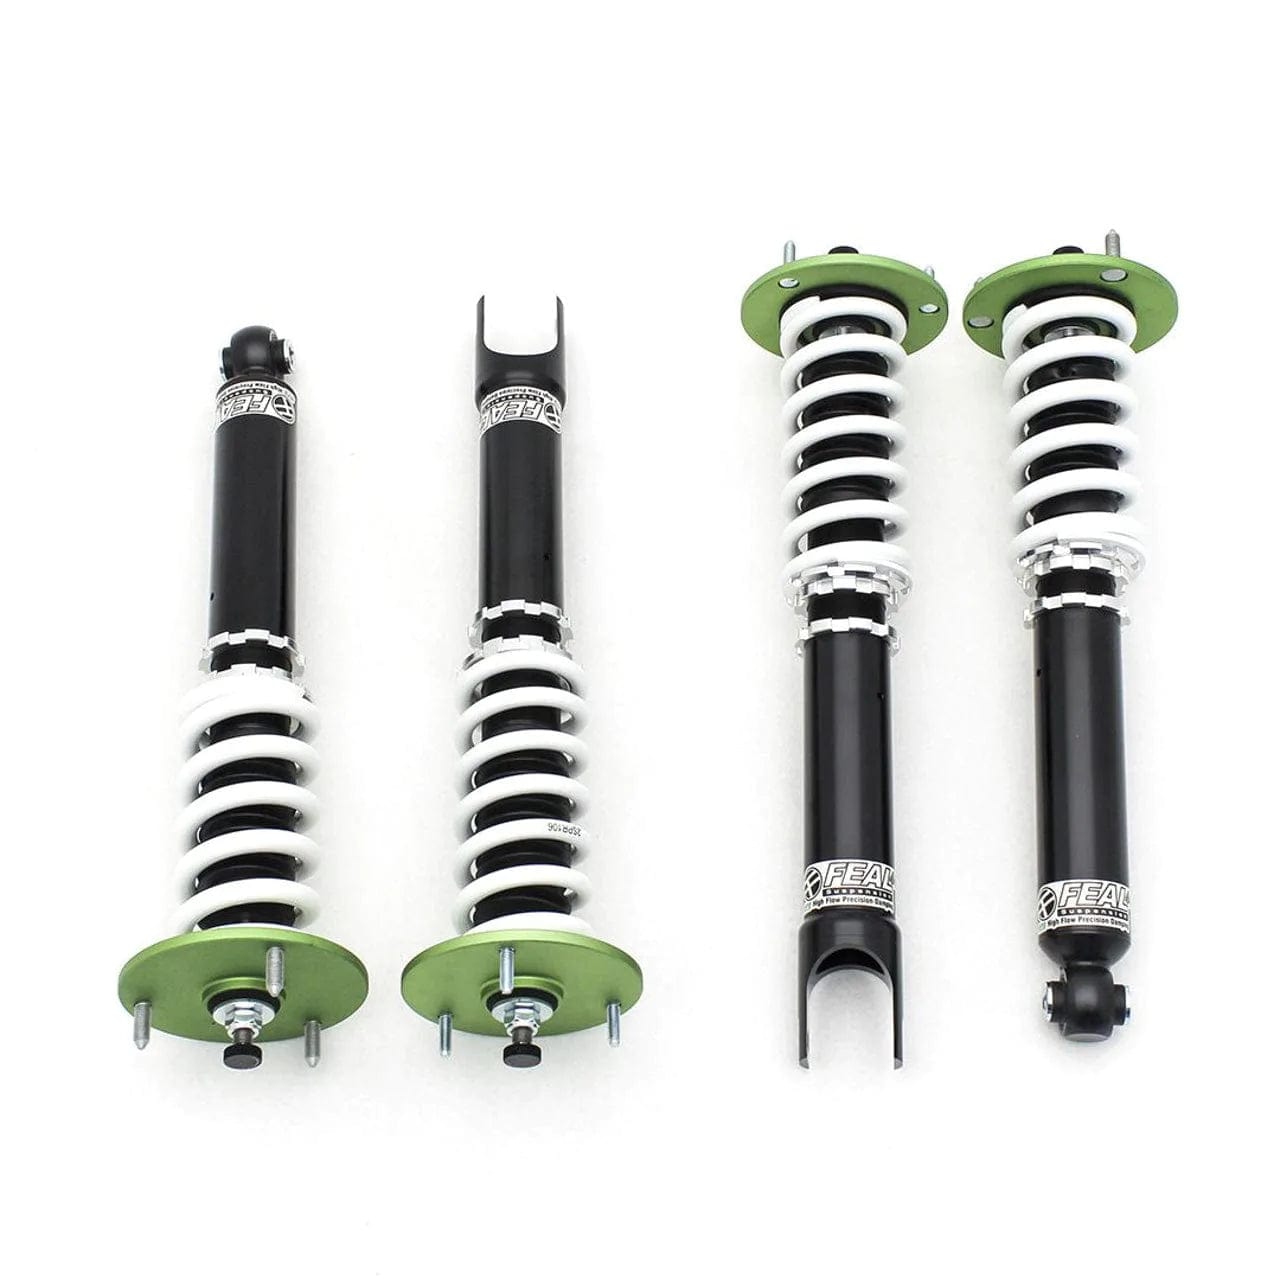 Feal 441 Heavy Front Coilovers - 2005-2014 Ford Mustang S197 441FO-01H